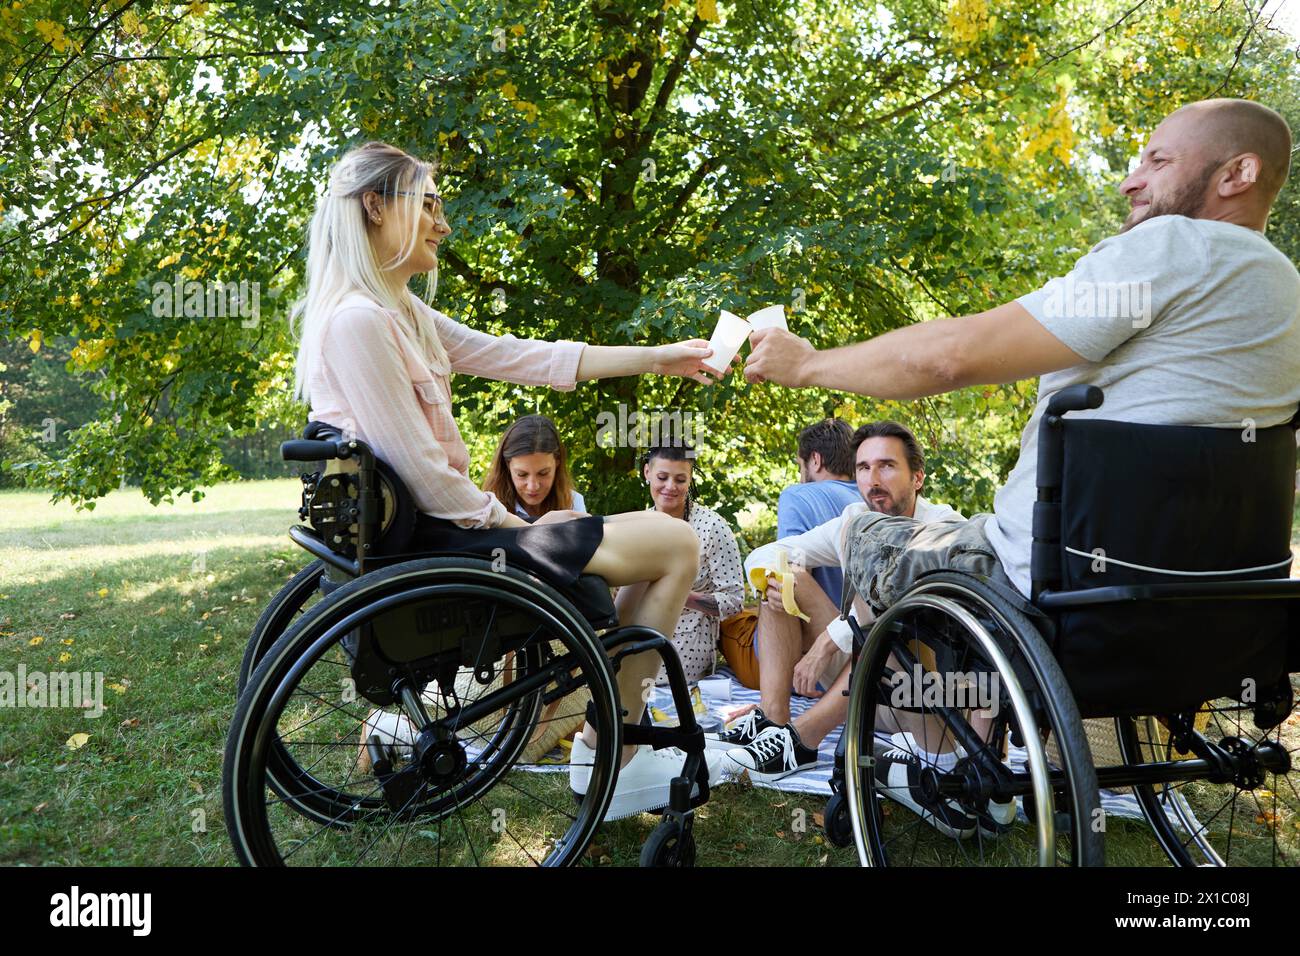 A diverse group enjoys a sunny day outdoors with two friends in wheelchairs passing a card, symbolizing inclusion. Stock Photo